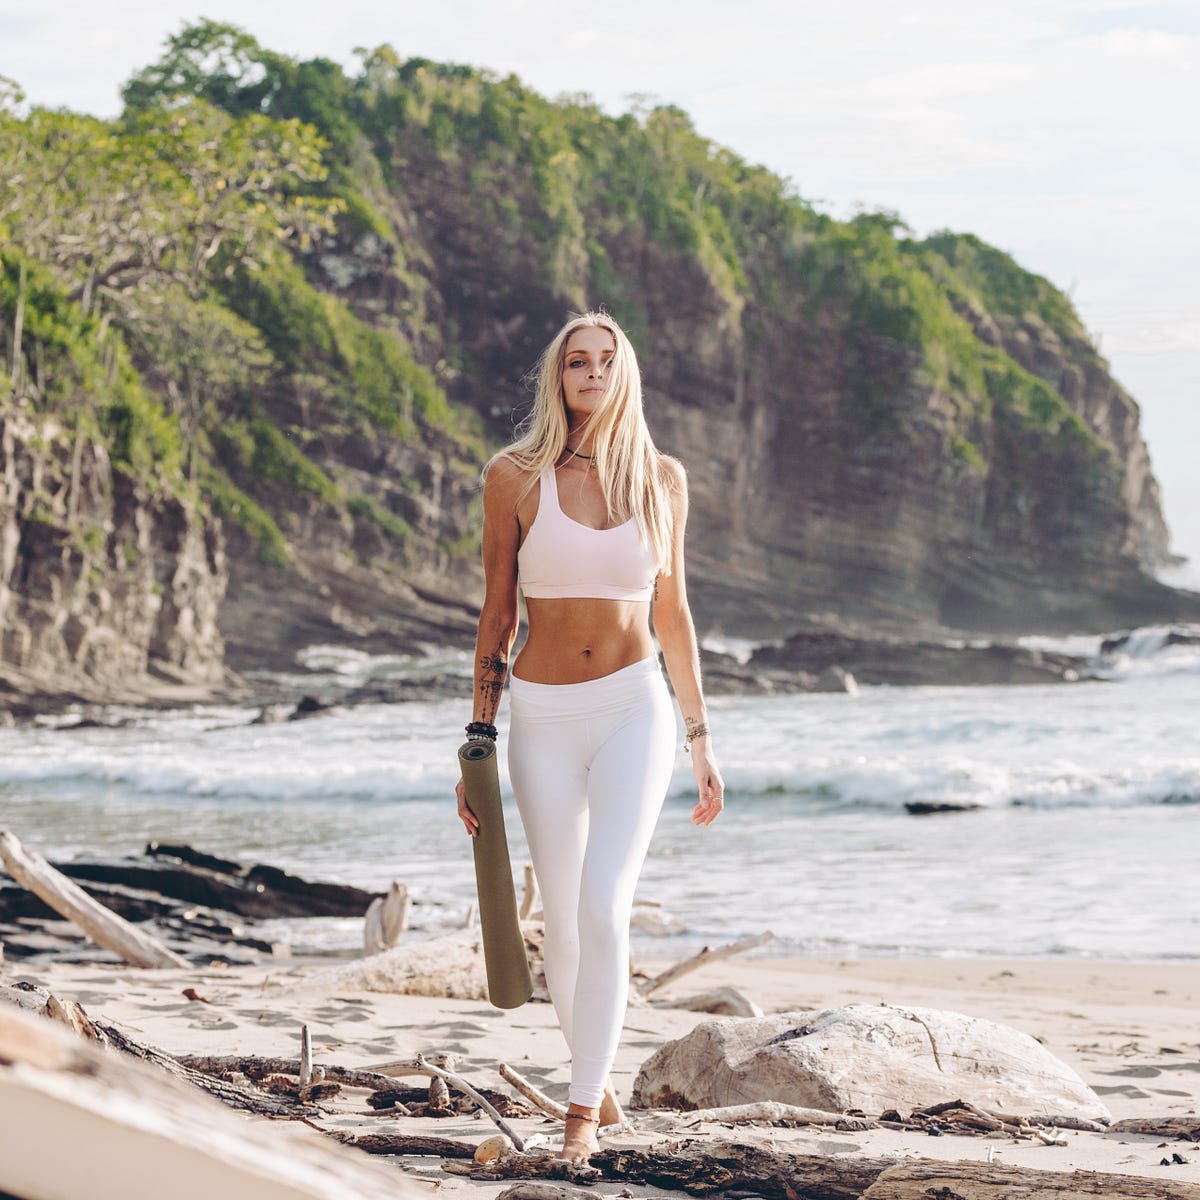 Women In Wellness: Juliana Spicoluk of Boho Beautiful on the Five Lifestyle  Tweaks That Will Help Support People's Journey Towards Better Wellbeing |  by Candice Georgiadis | Authority Magazine | Medium